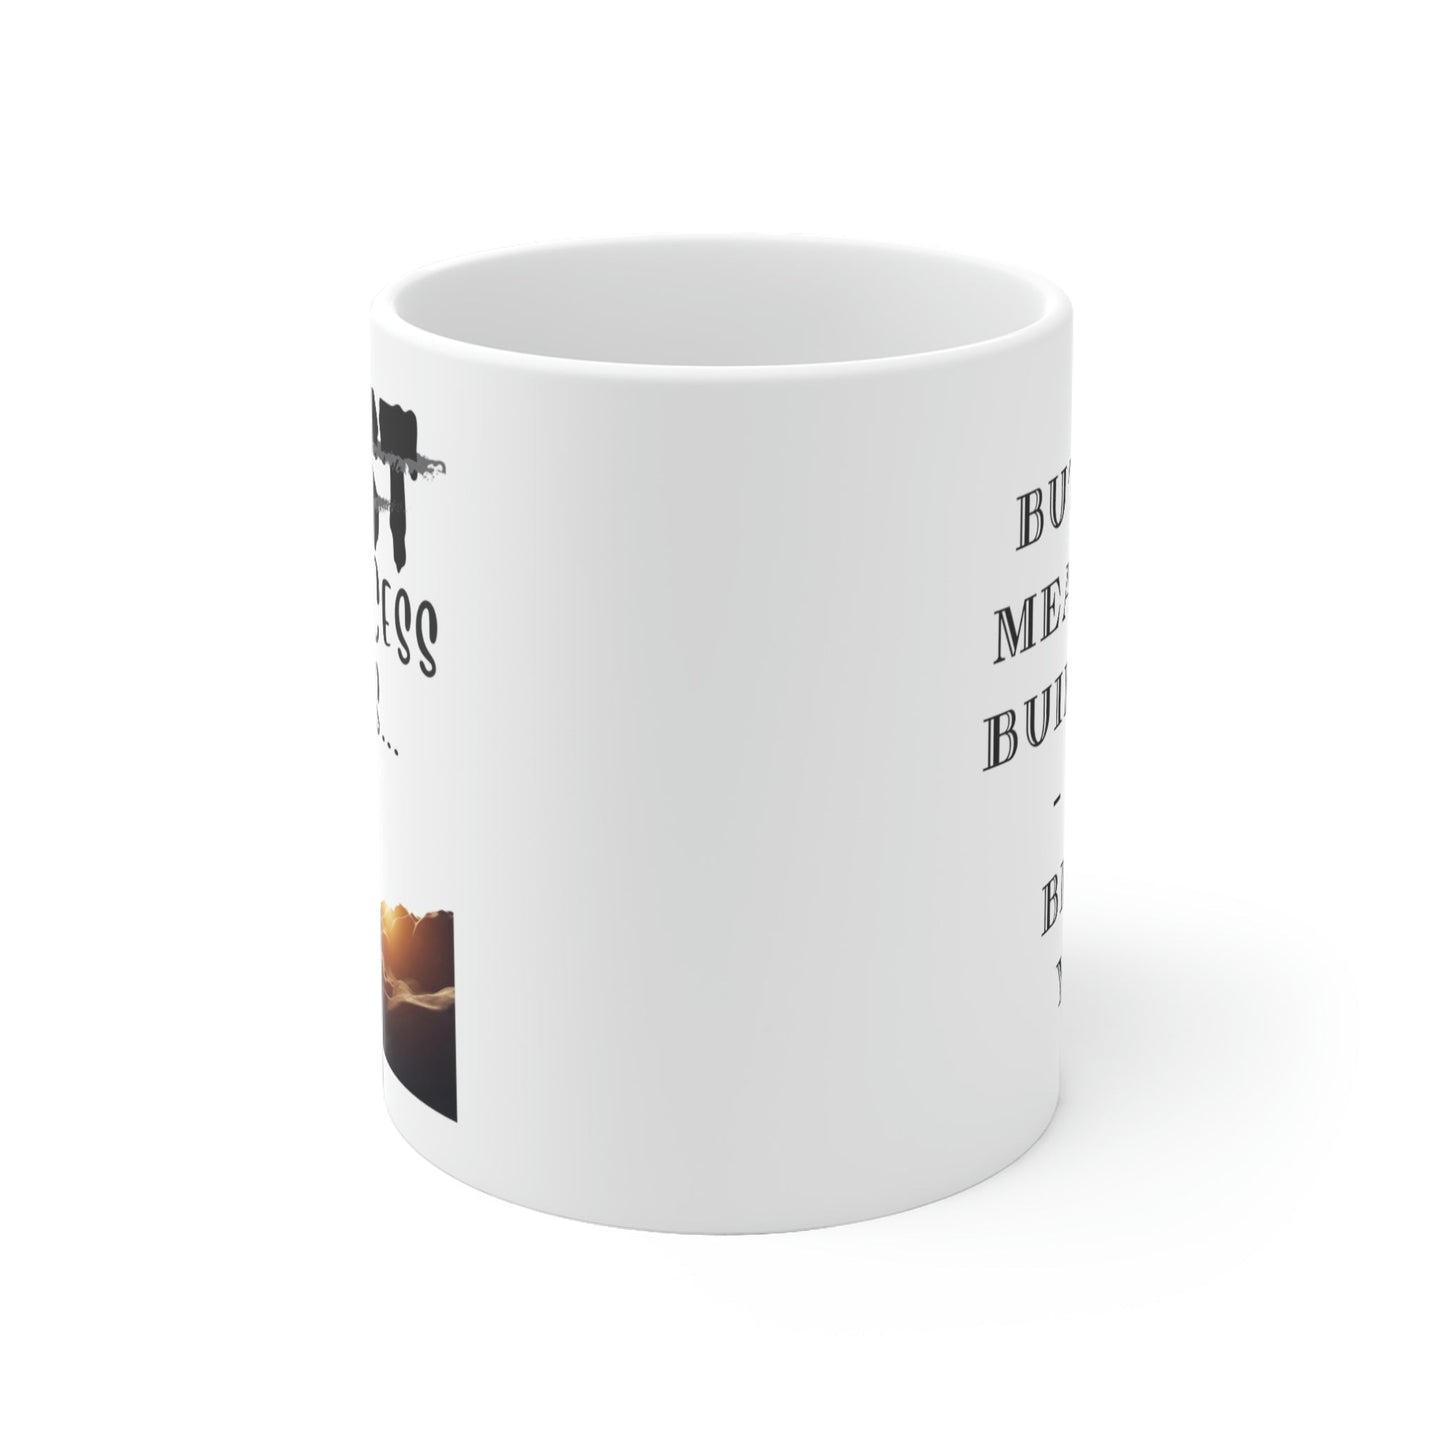 White Ceramic Mug, Accent Mug, Inspirational, Available in Two Sizes and Styles